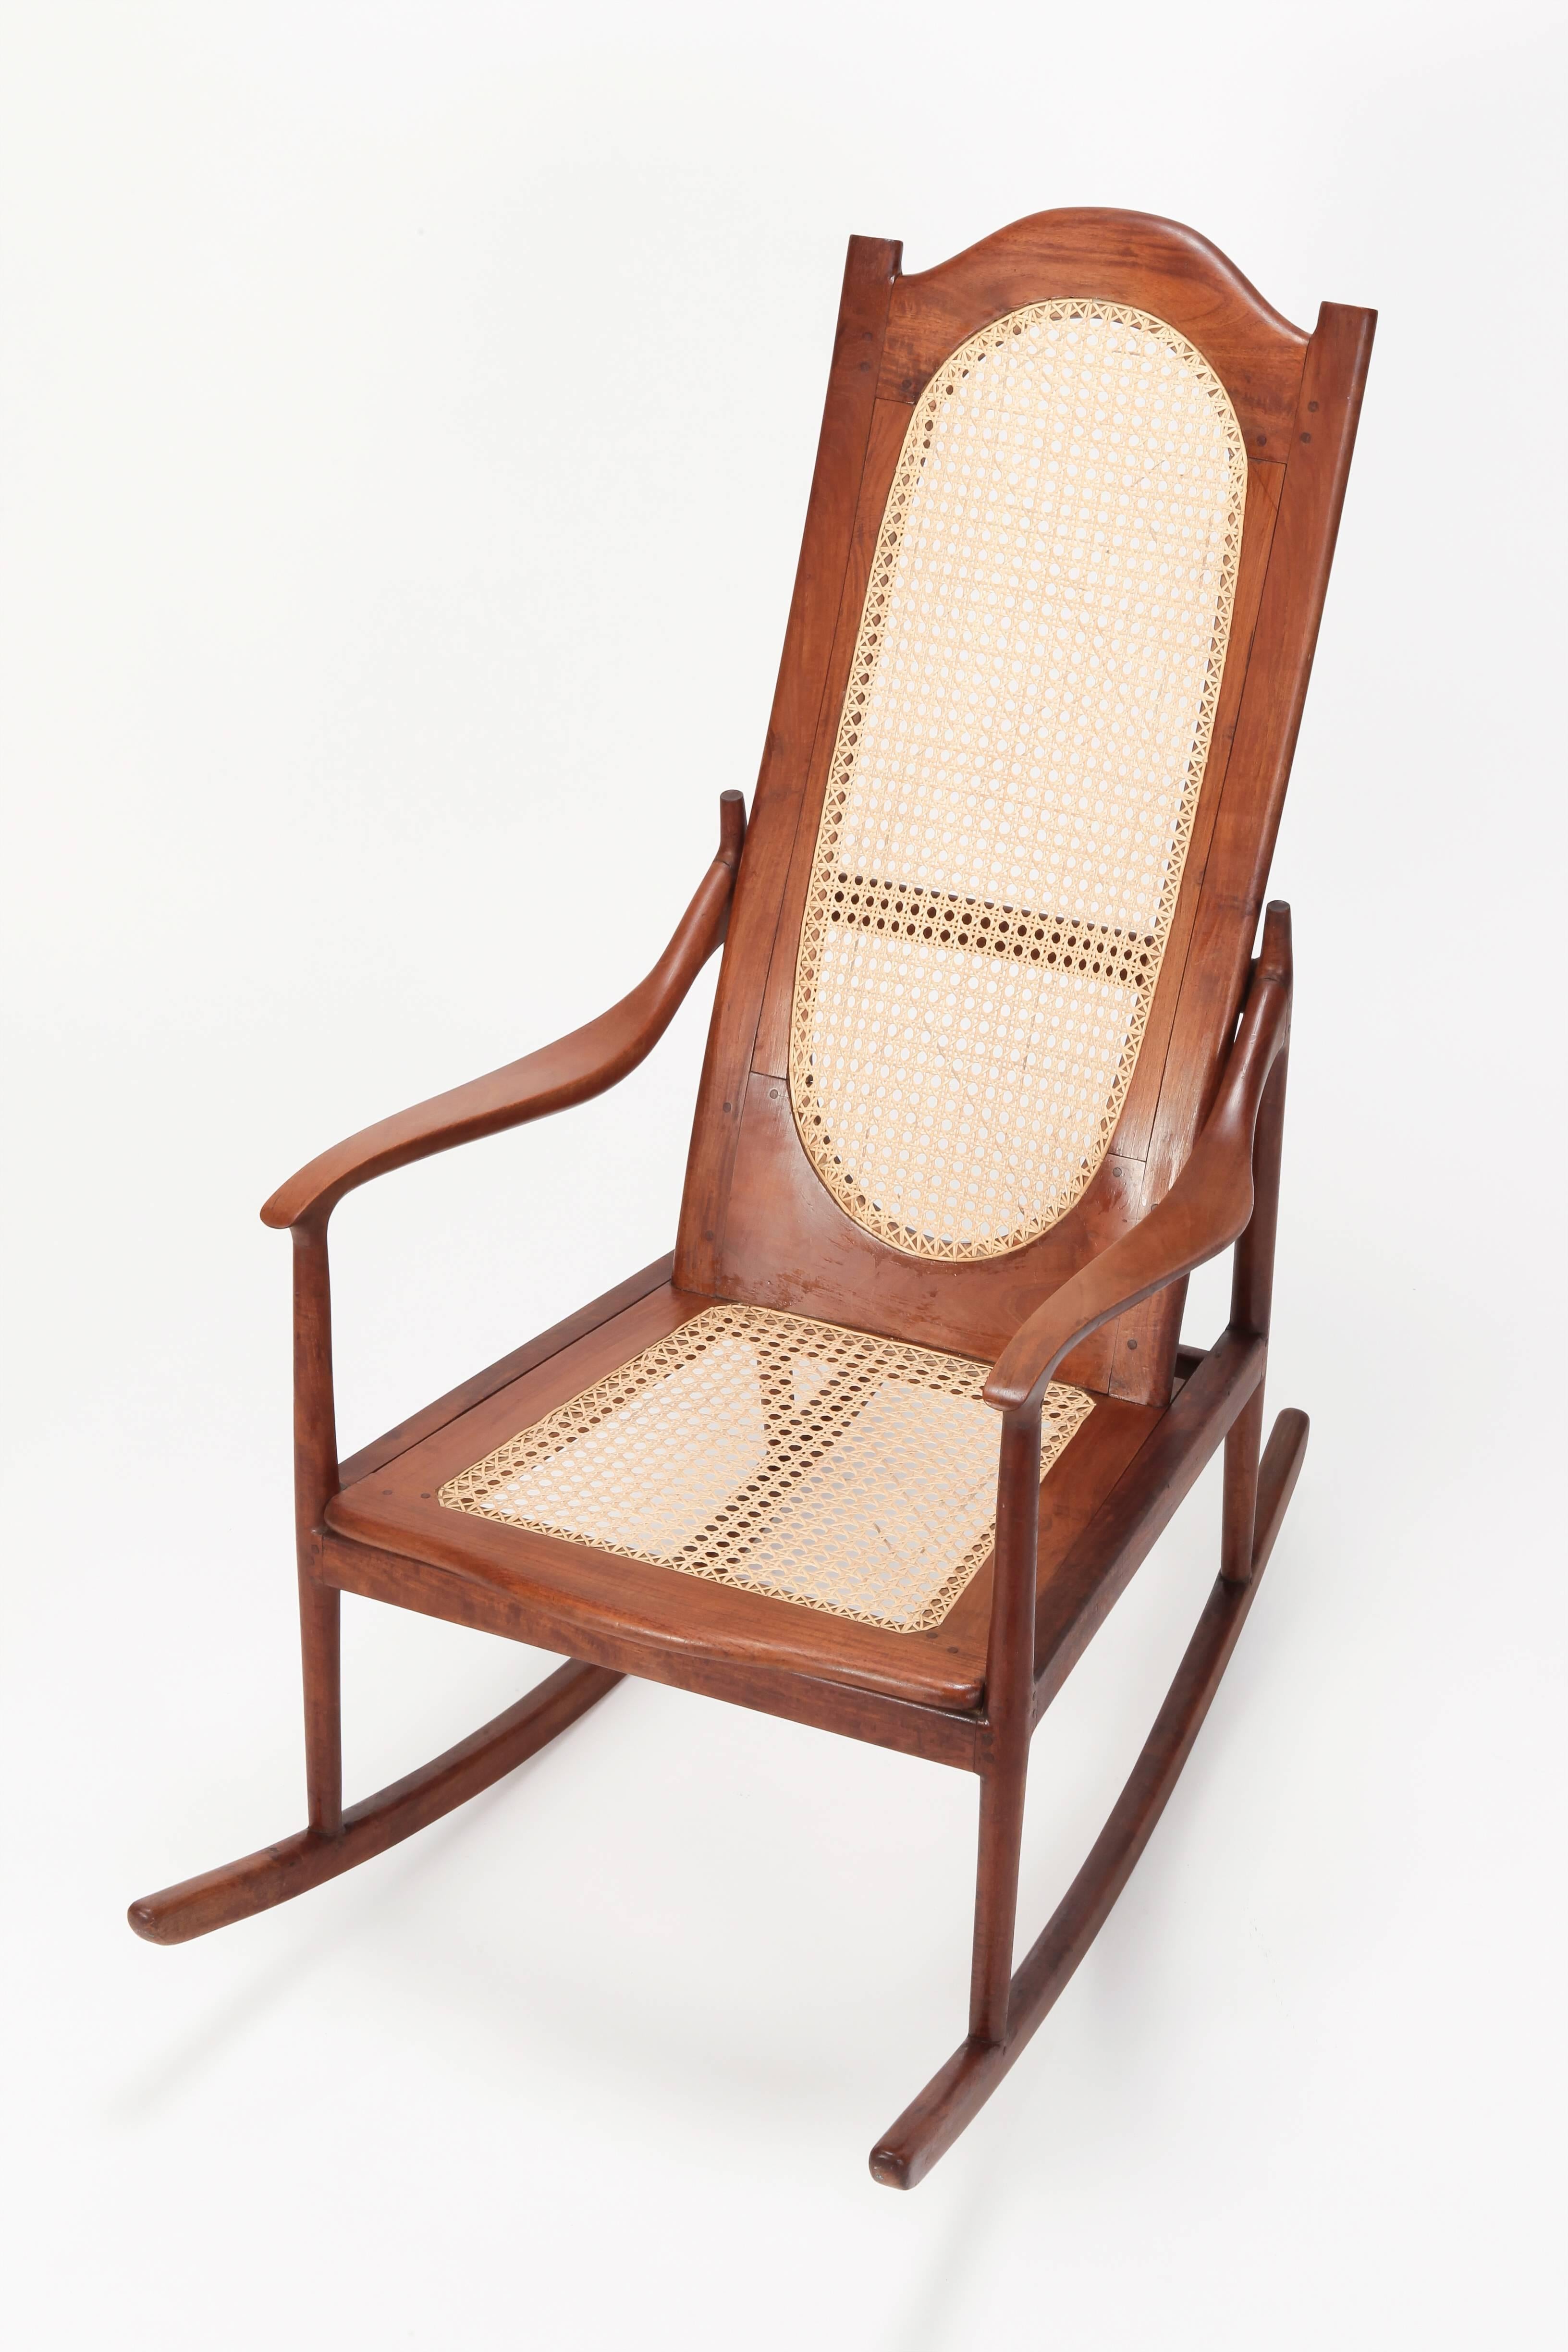 This solid mahogany rocking chair was built with devoted handcraftsmanship in the States in the 1890s. The Jonc seats were carefully renewed. There is no screw on the entire frame, everything is built together with wooden nails. All pieces were